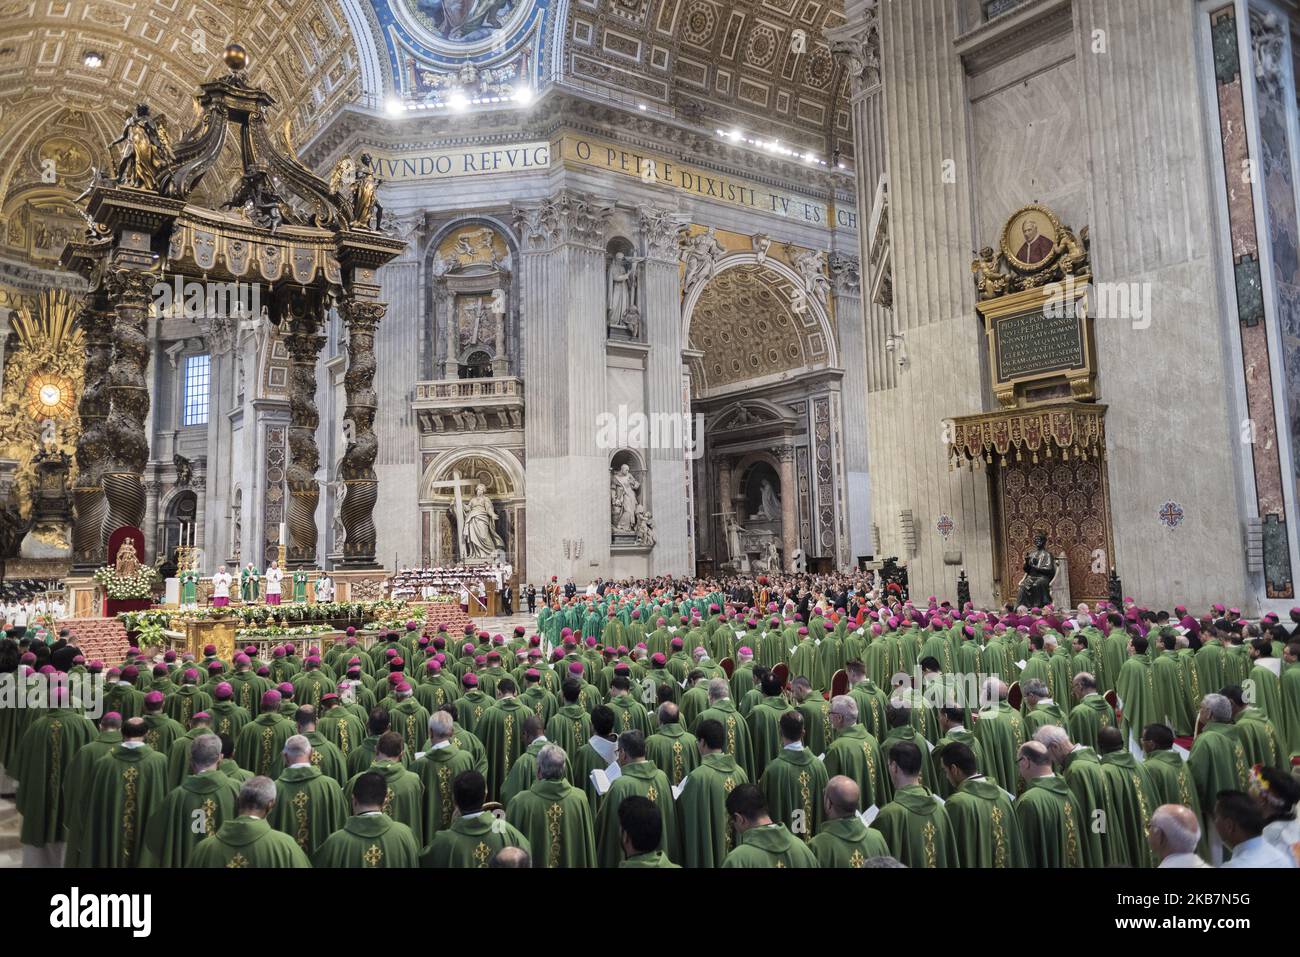 Pope Francis celebrates an opening Mass for the Amazon synod, in St. Peter's Basilica, at the Vatican, Sunday, Oct. 6, 2019. (Photo by Massimo Valicchia/NurPhoto) Stock Photo